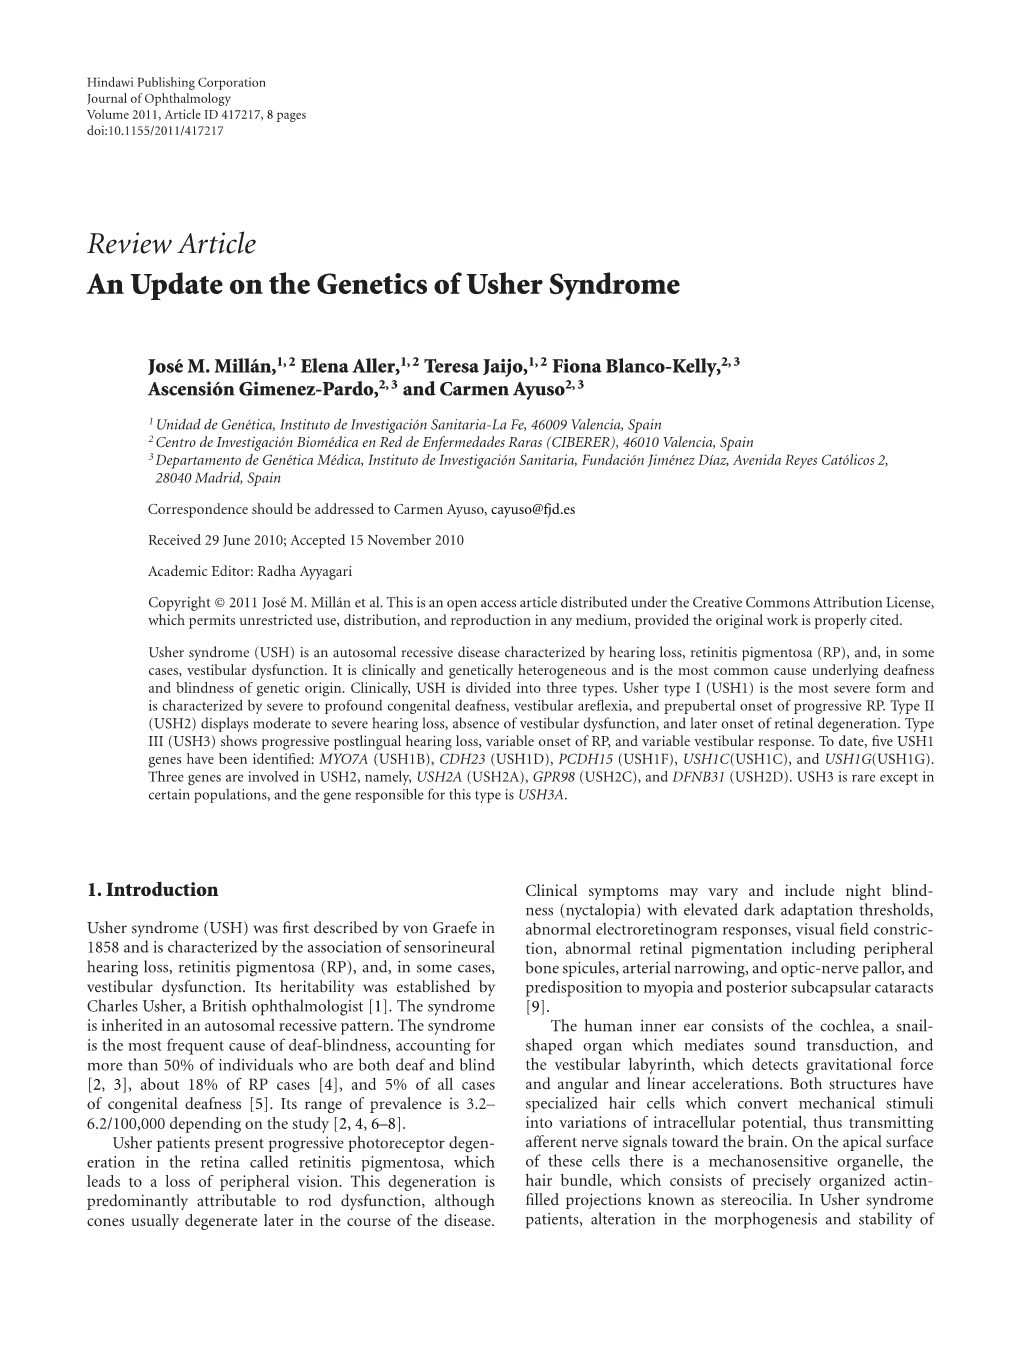 An Update on the Genetics of Usher Syndrome